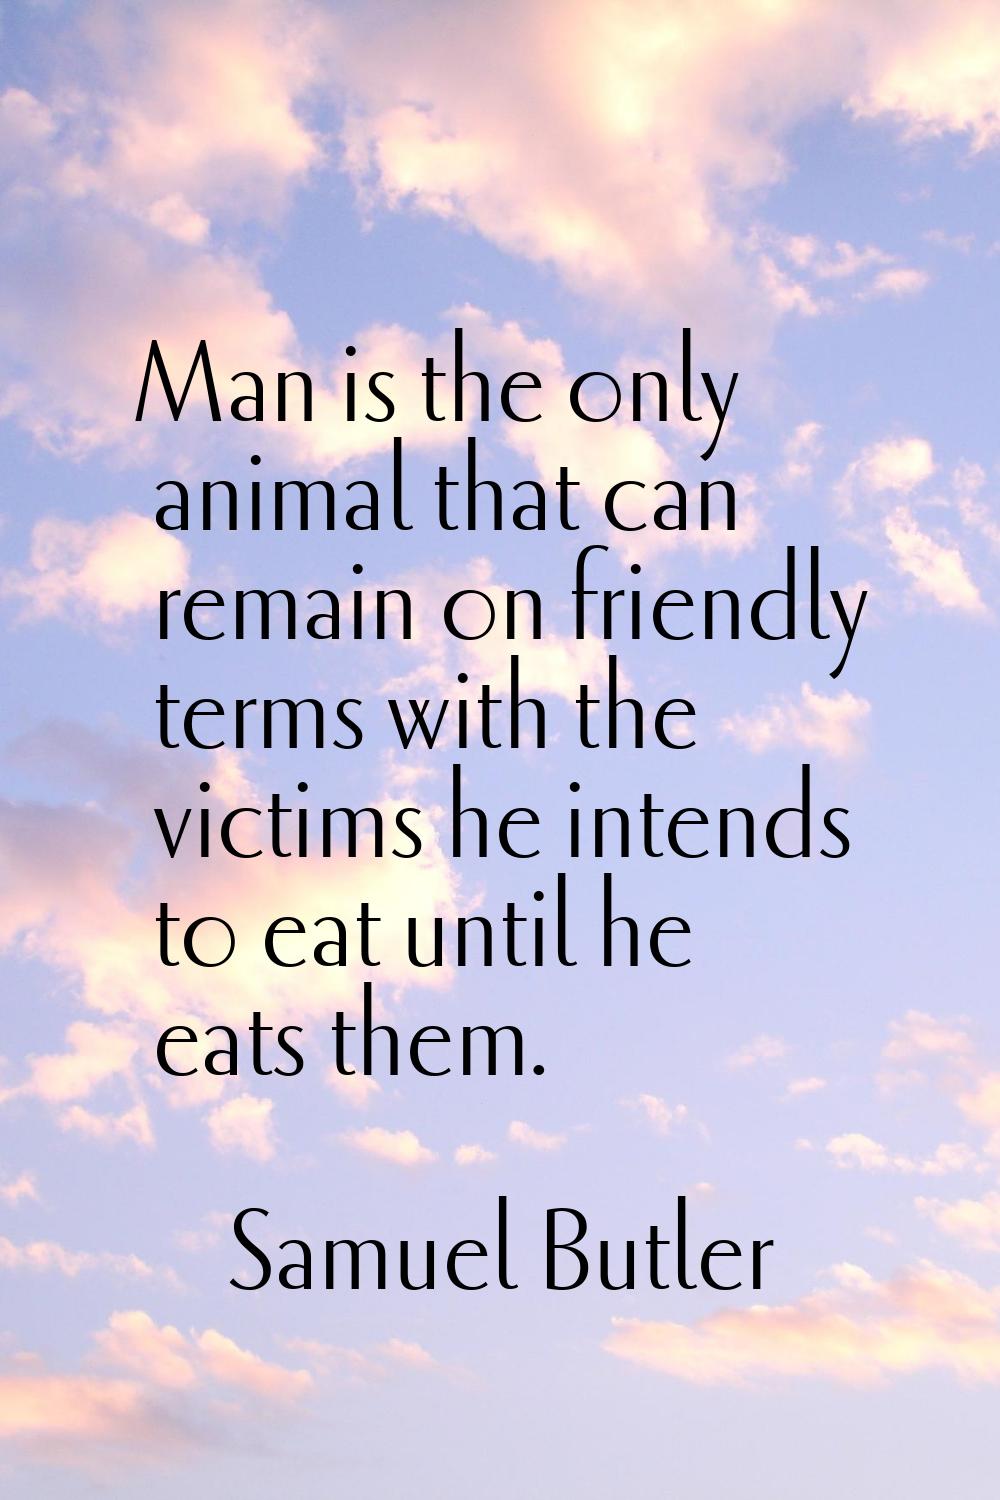 Man is the only animal that can remain on friendly terms with the victims he intends to eat until h